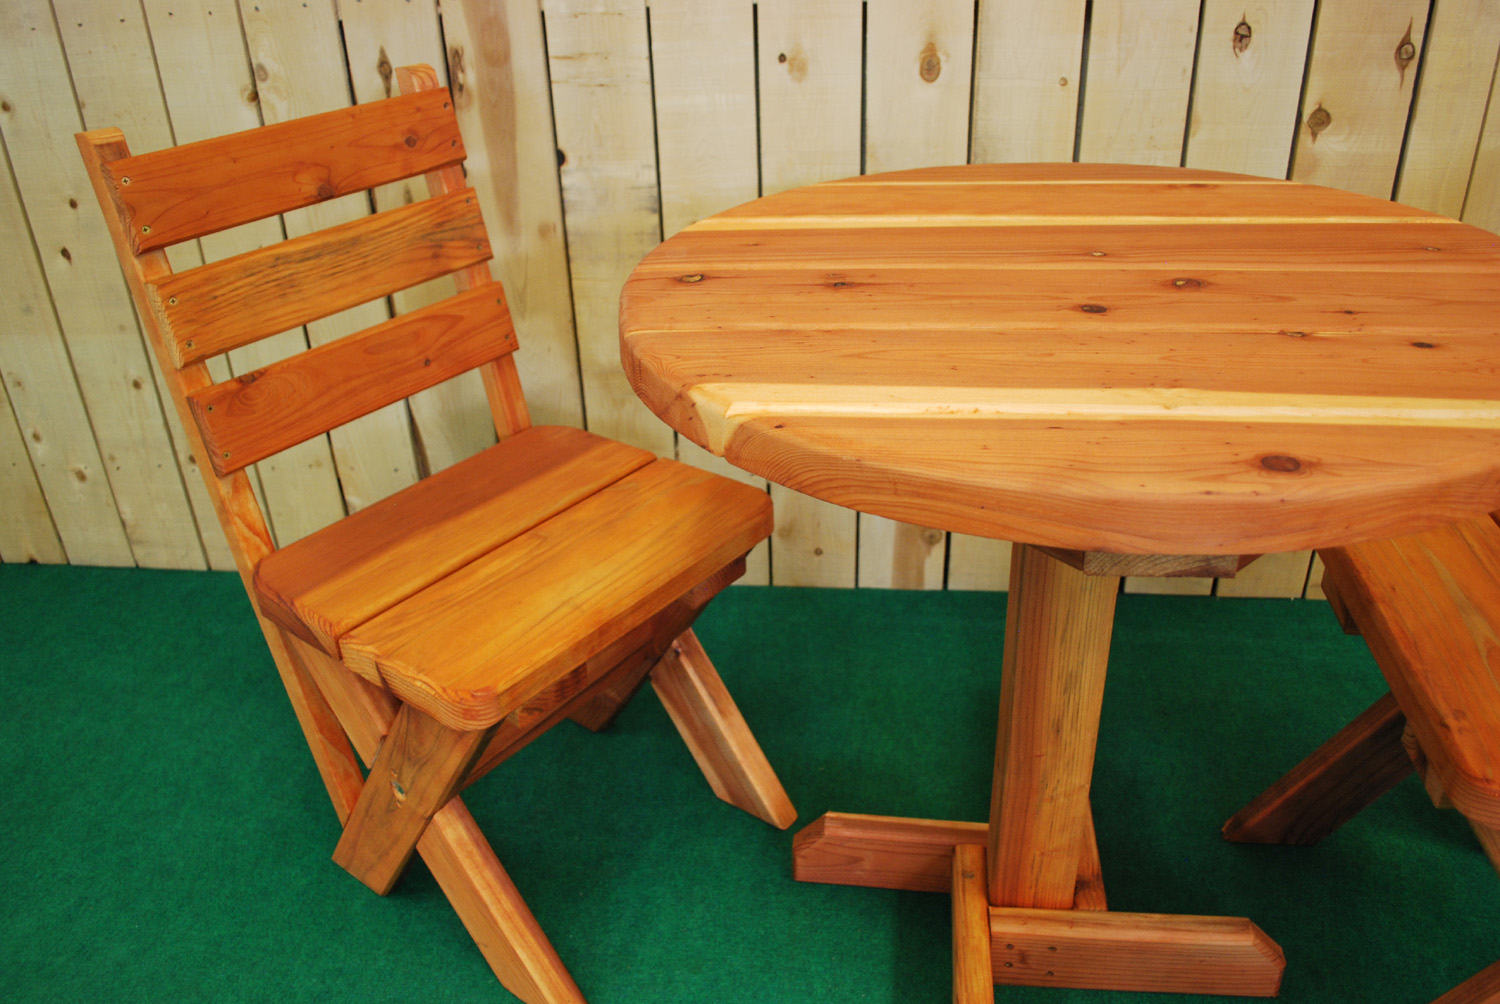 30" round redwood picnic table